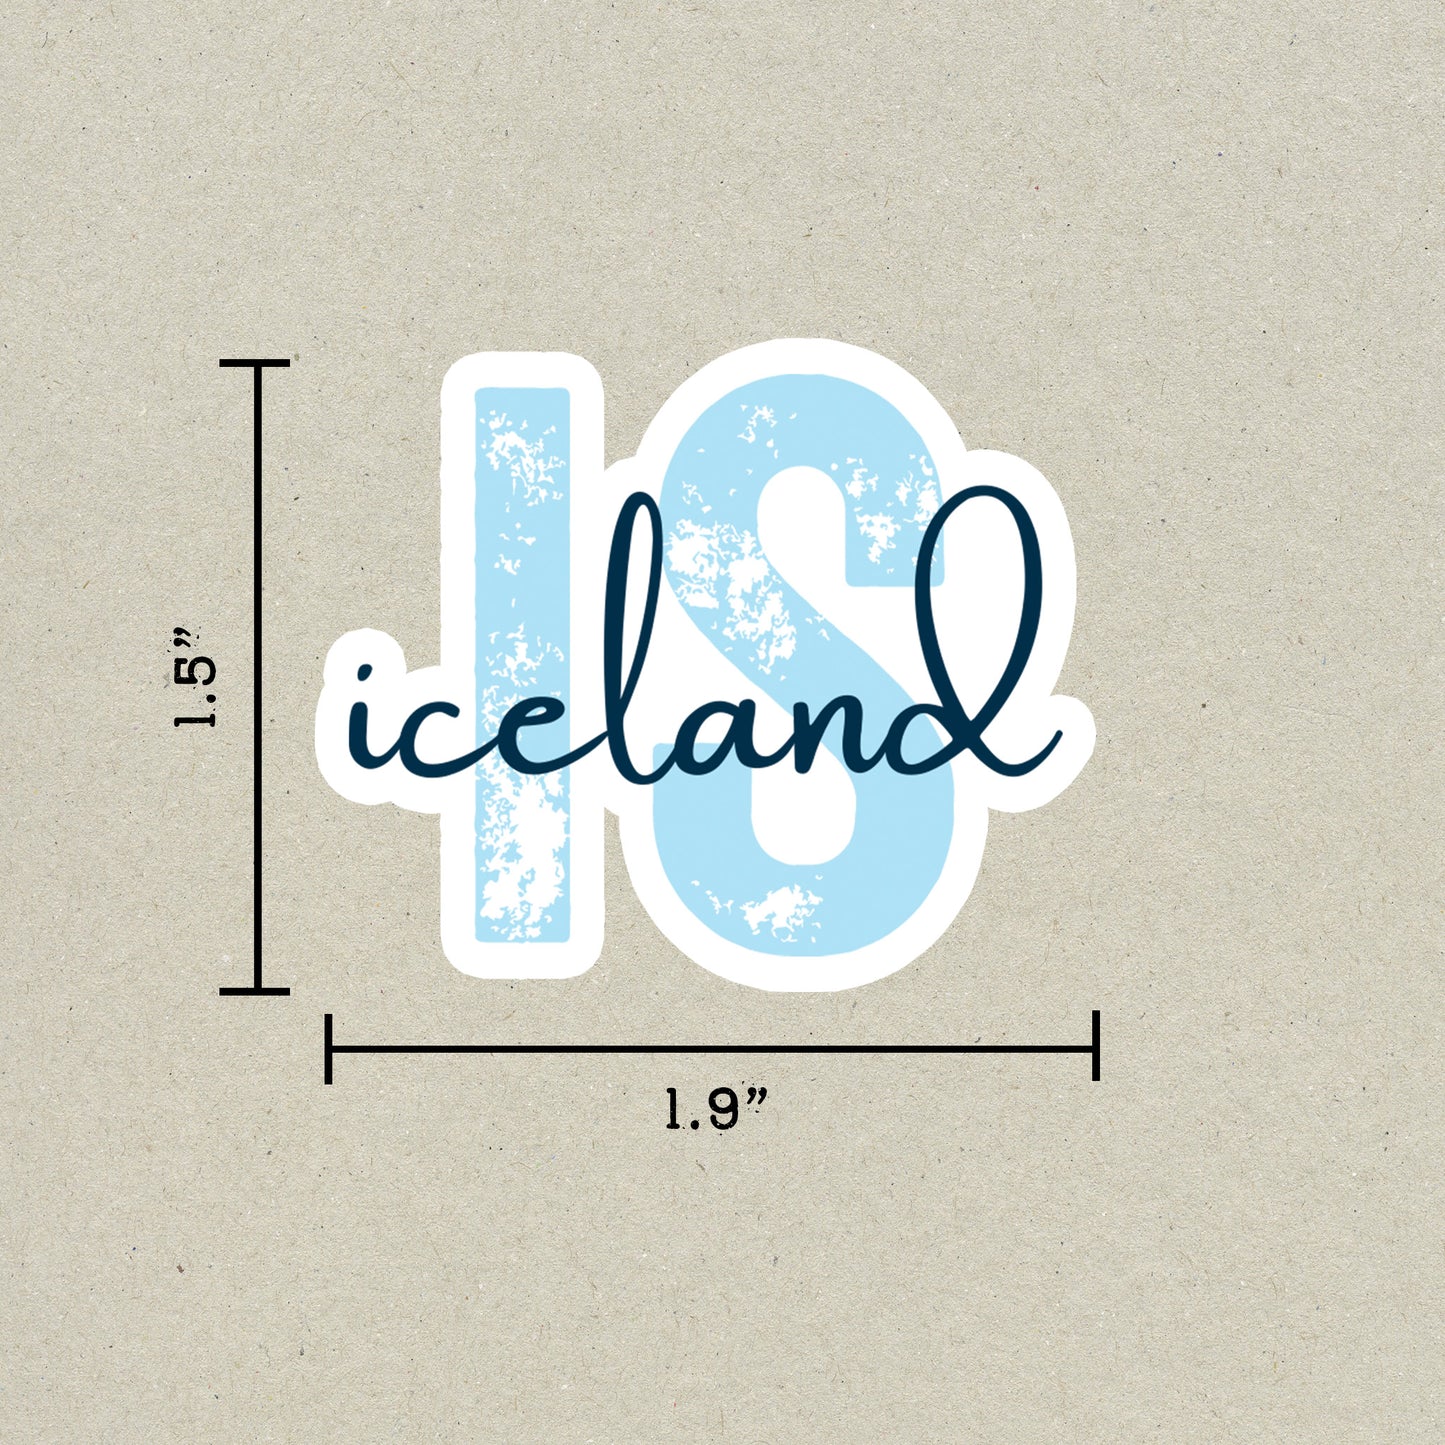 Iceland Country Code Sticker